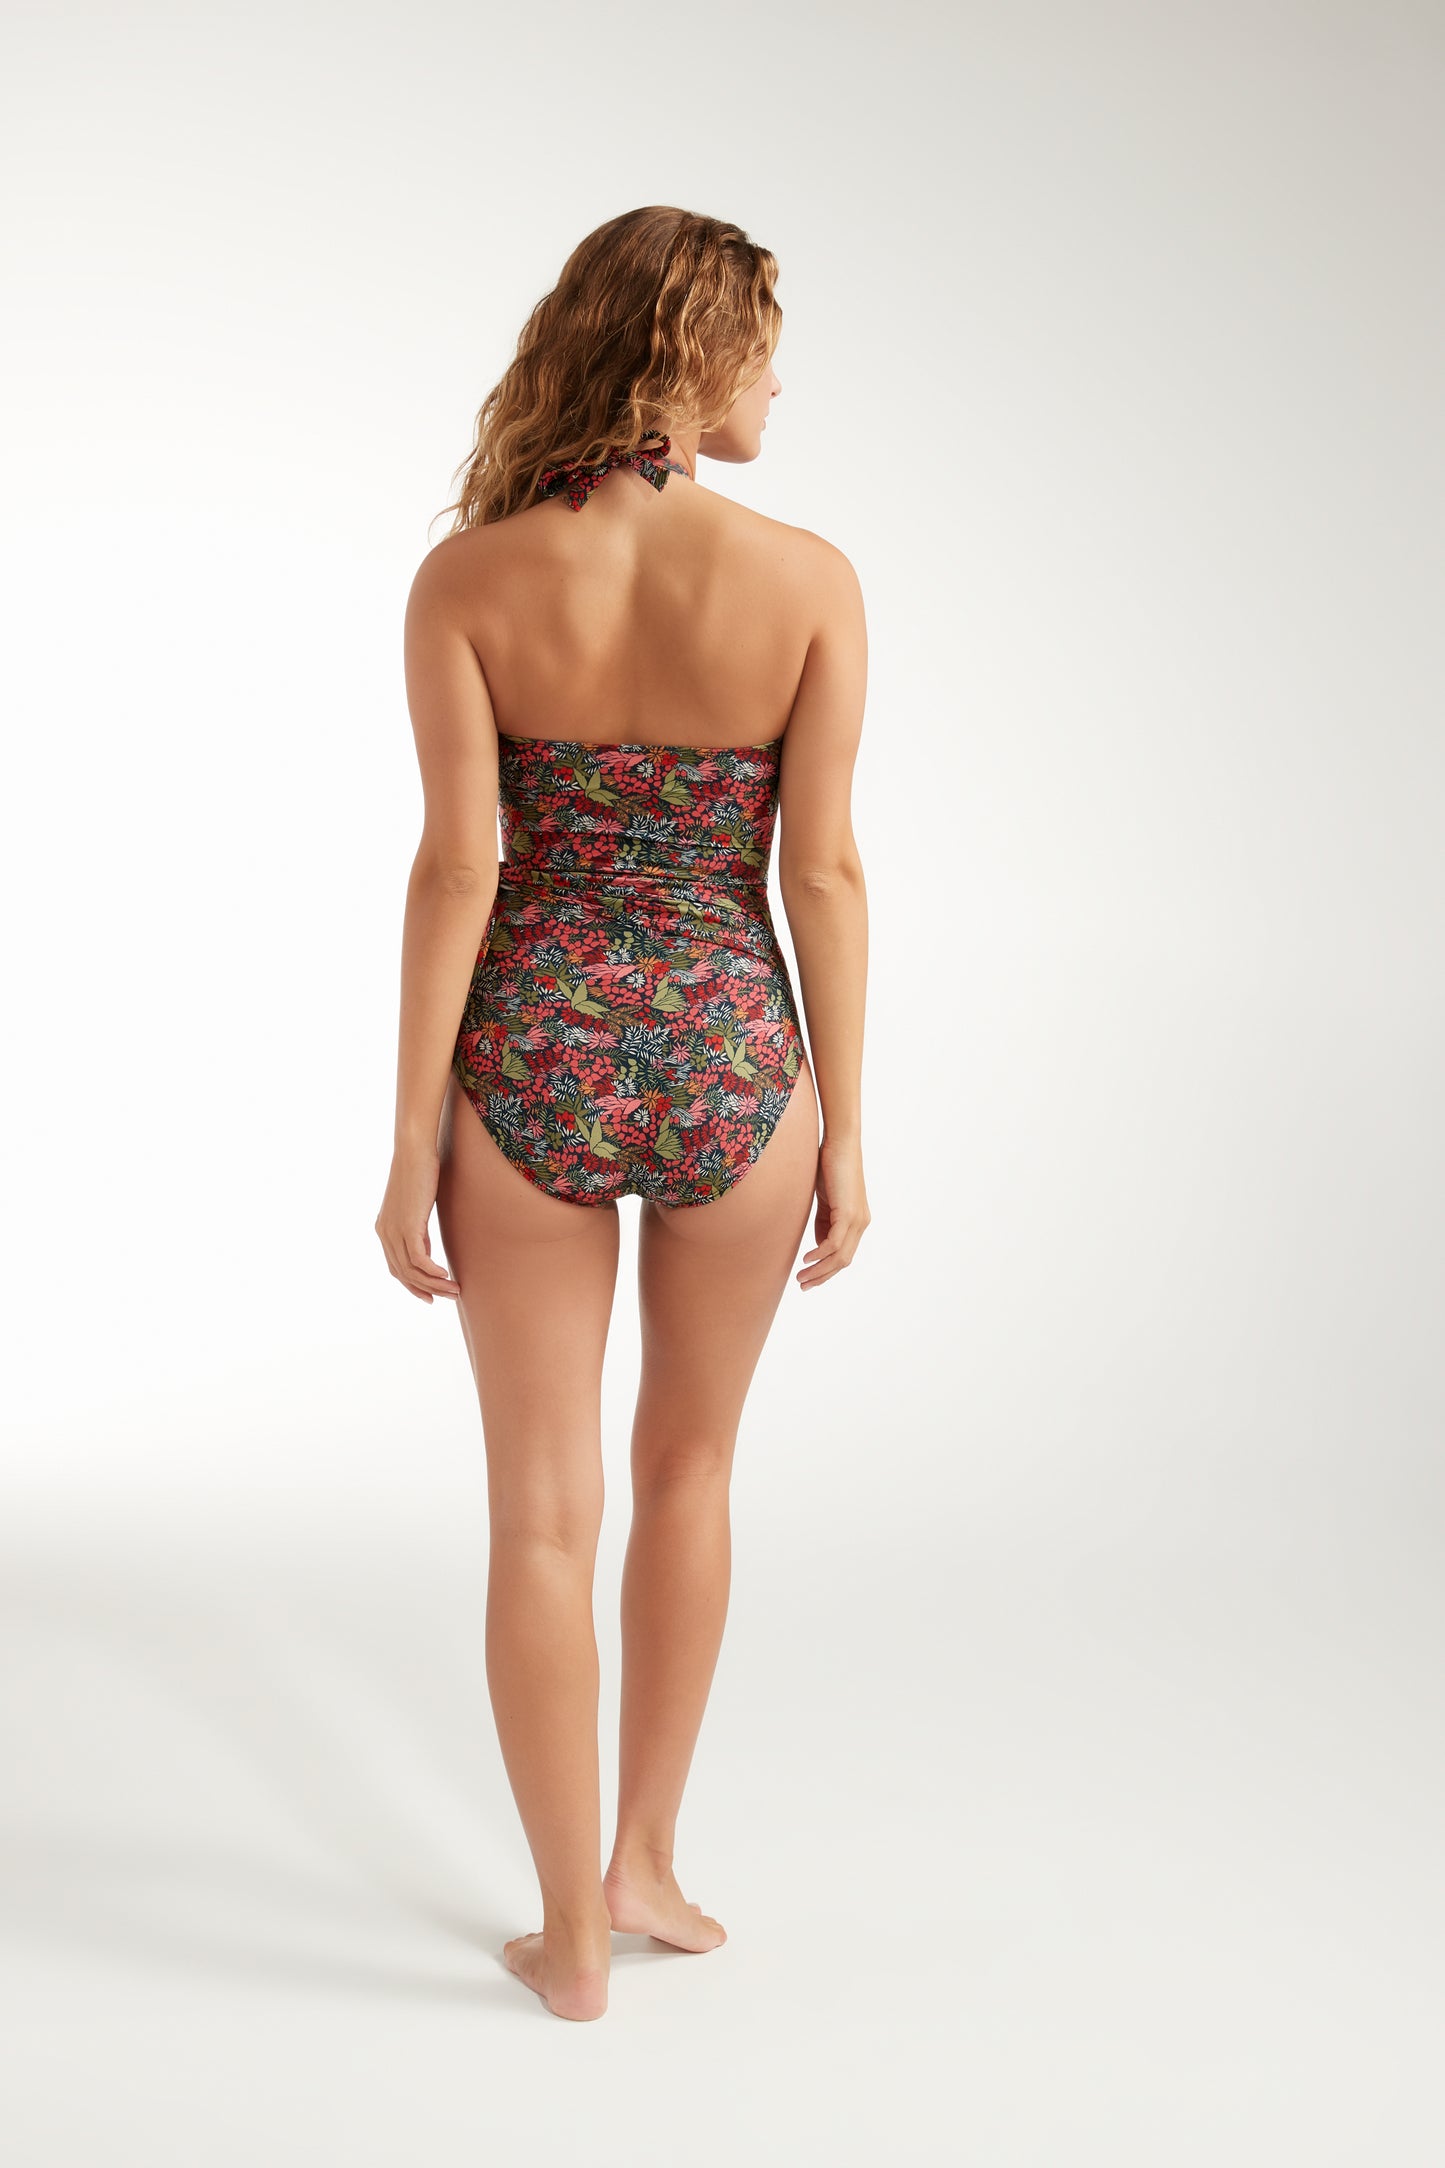 Back of Woman Modeling One Piece Swimsuit